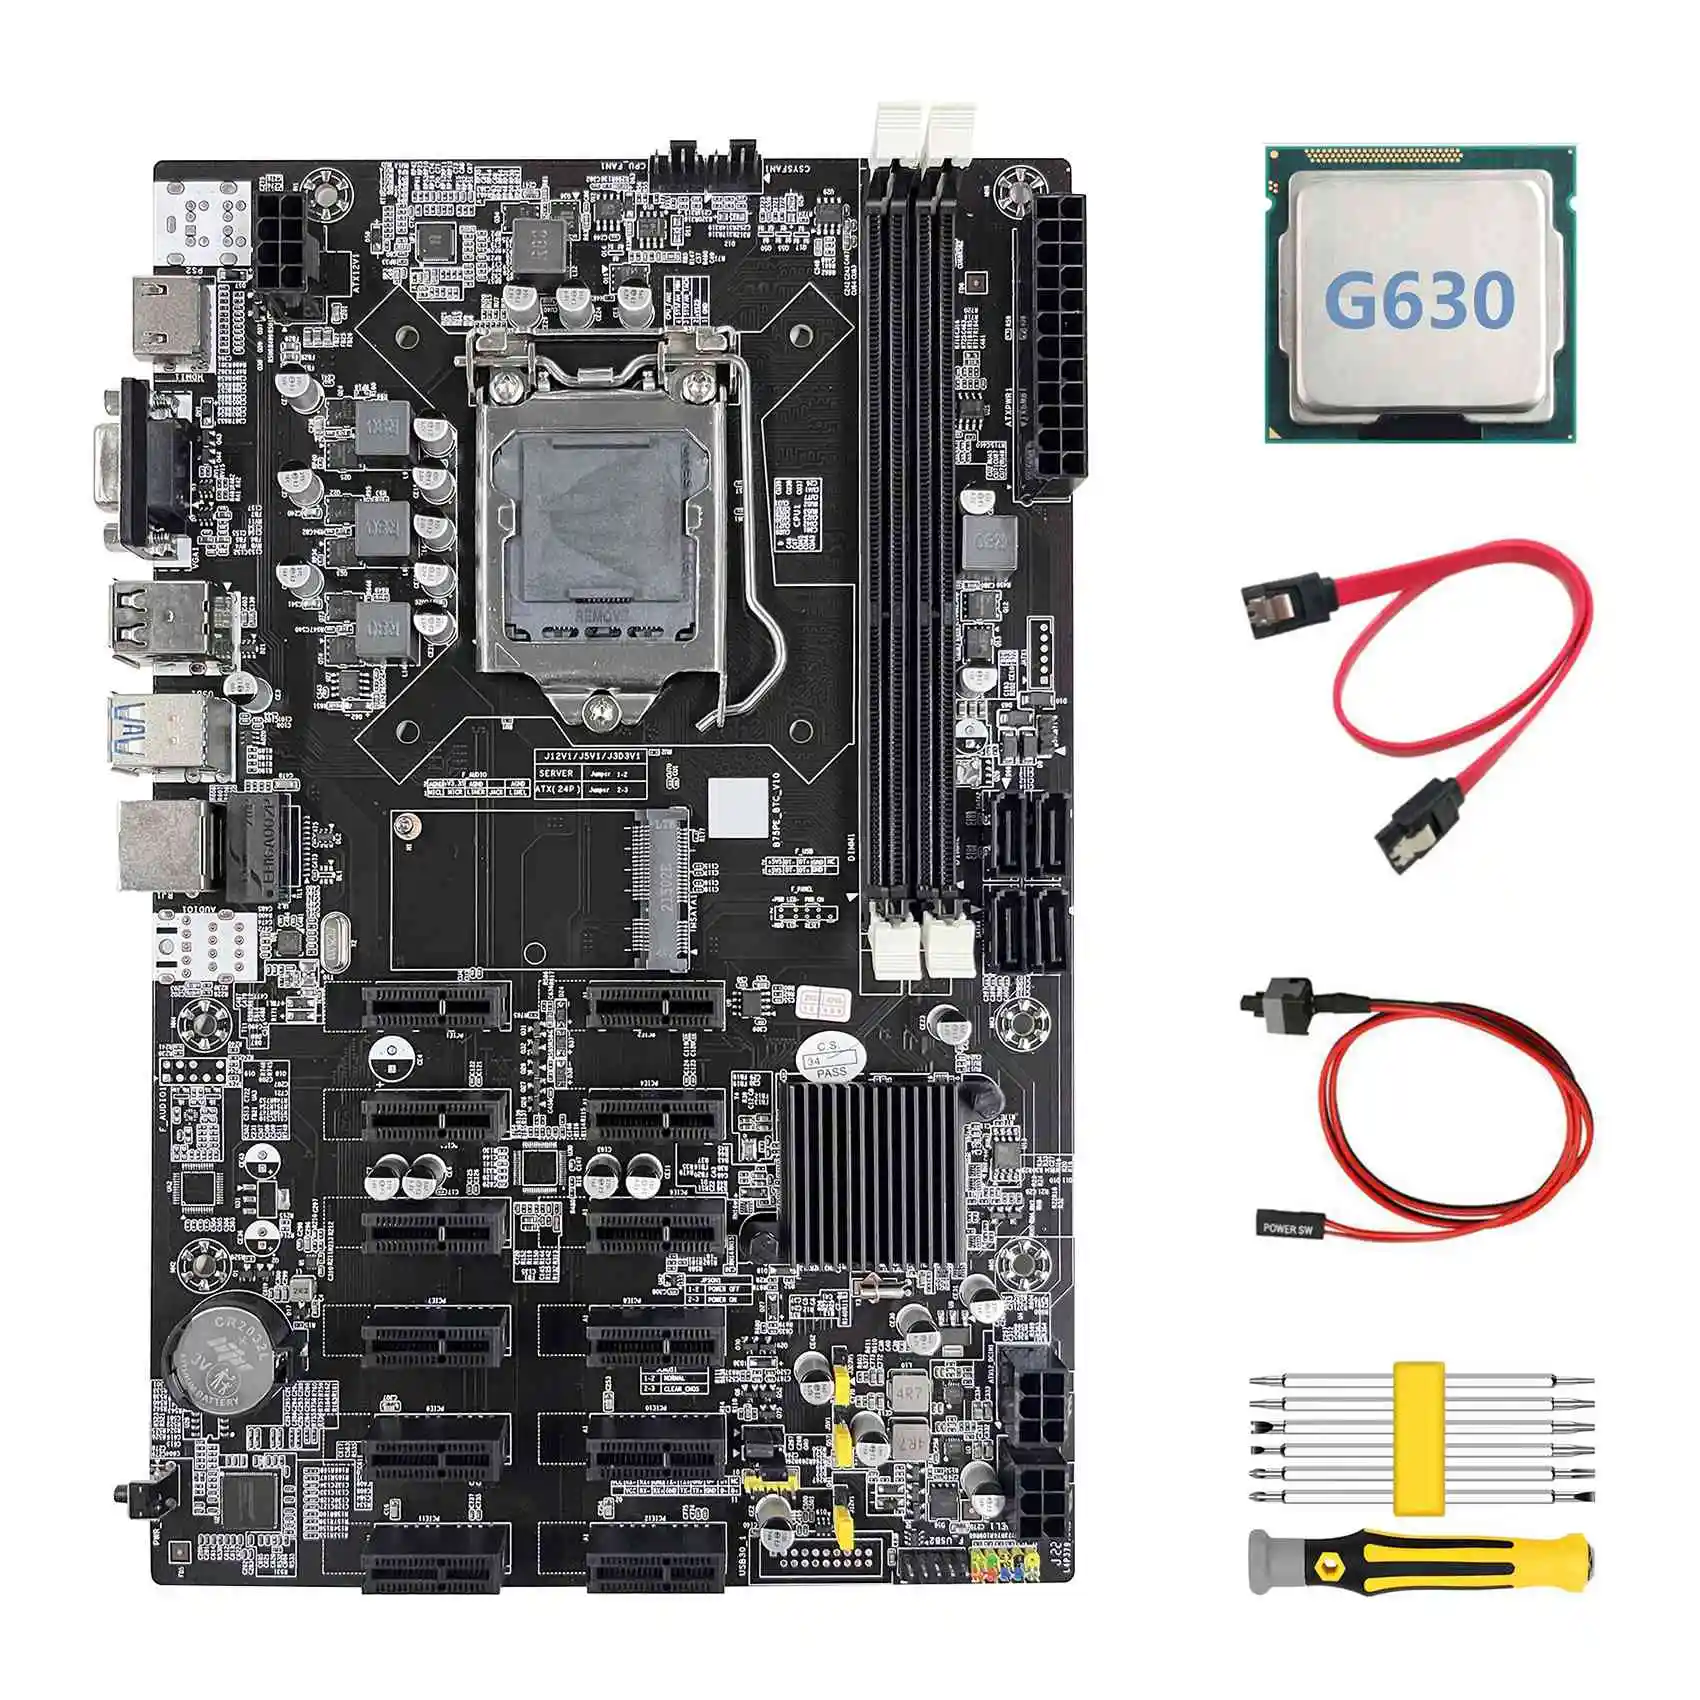 B75 ETH Mining Motherboard 12 PCIE+G630 CPU+Screwdriver Set+SATA Cable+Switch Cable LGA1155 B75 BTC Miner Motherboard